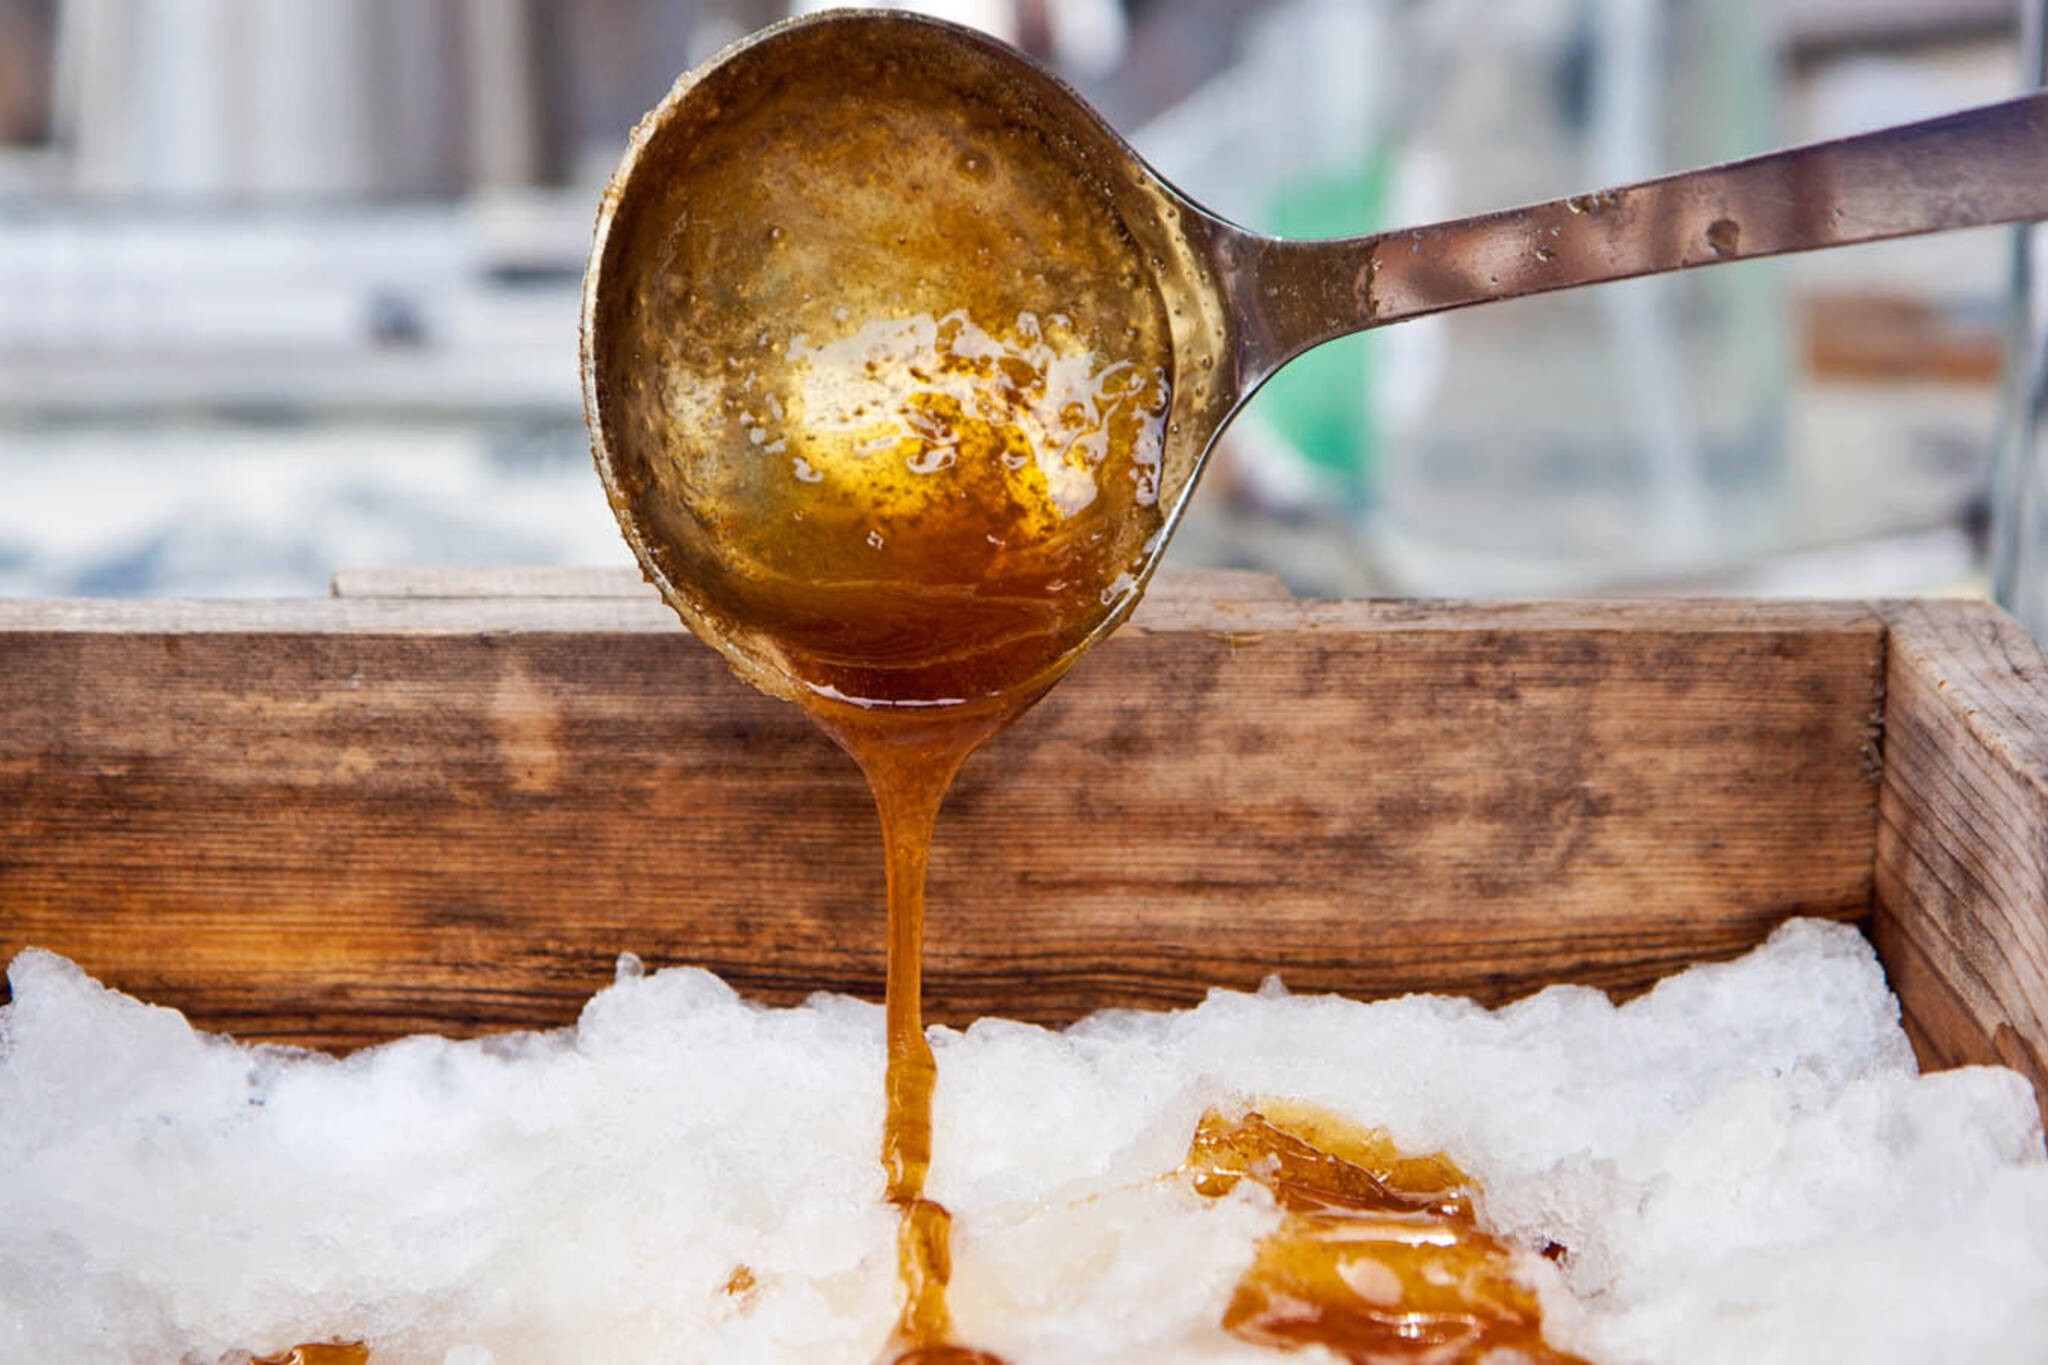 There's an epic maple syrup festival near Toronto this winter